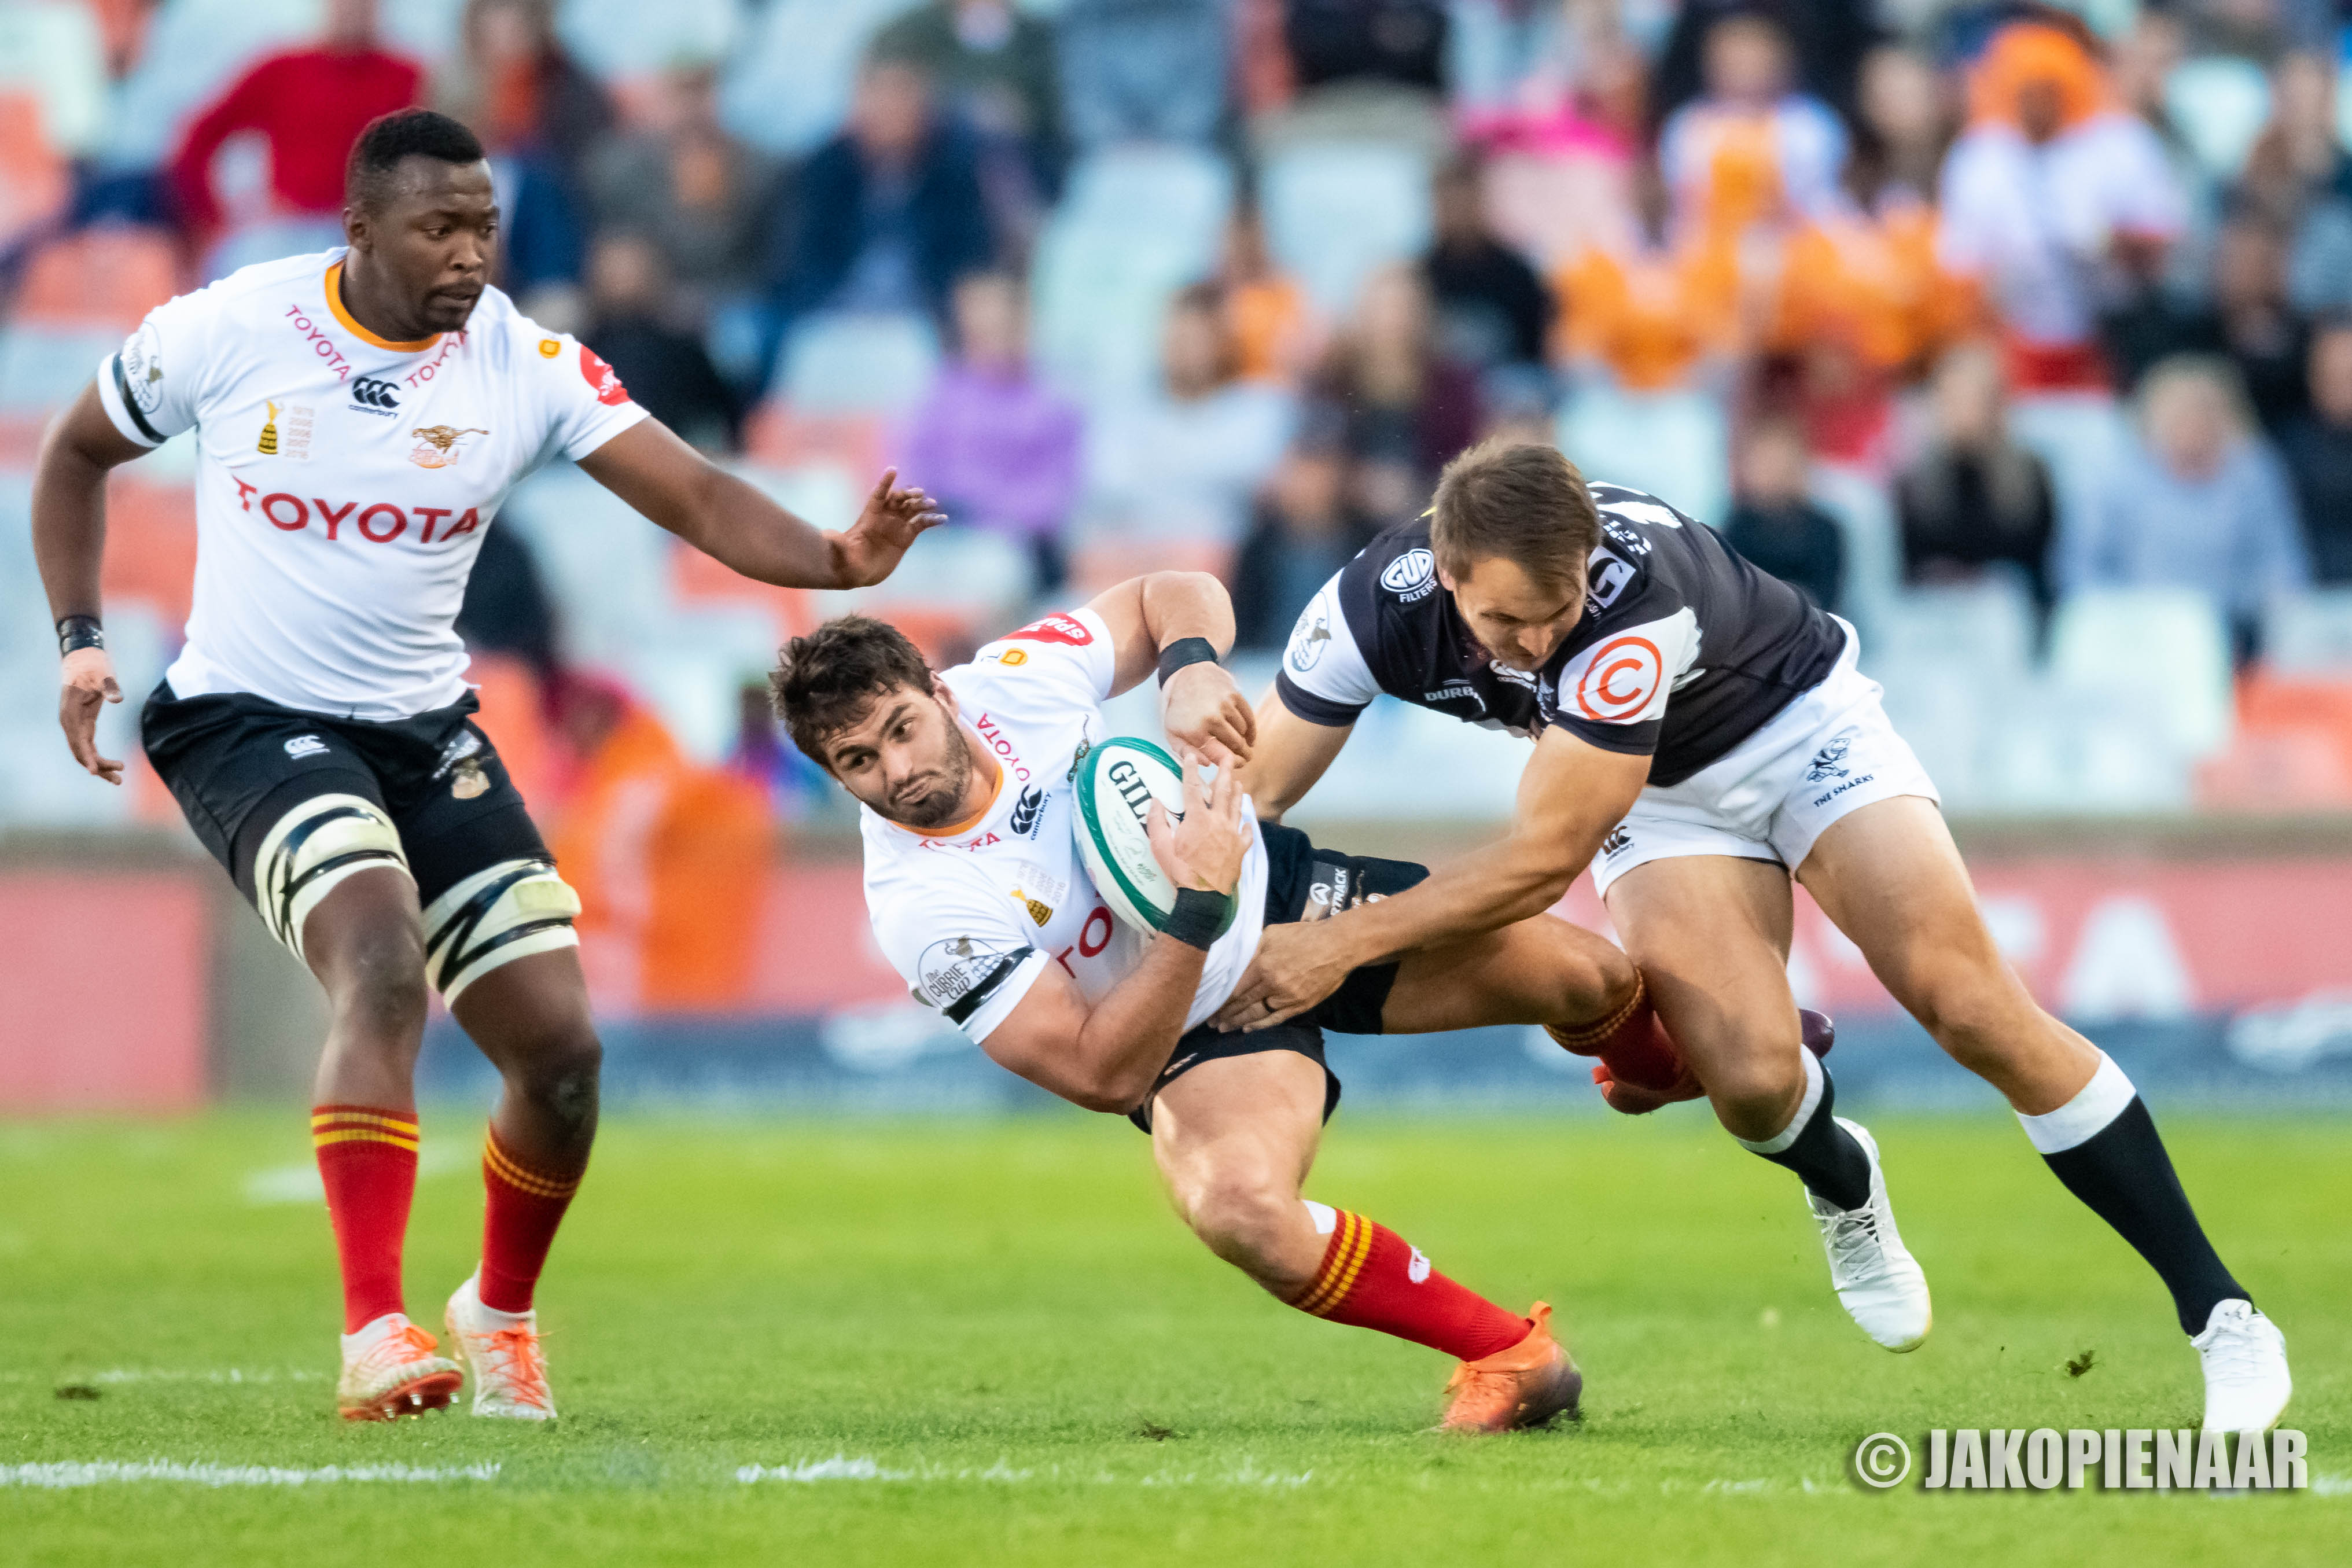 MediClinic and ER24 to also support the supporting staff during the 2019 Currie Cup final in Toyota Stadium.